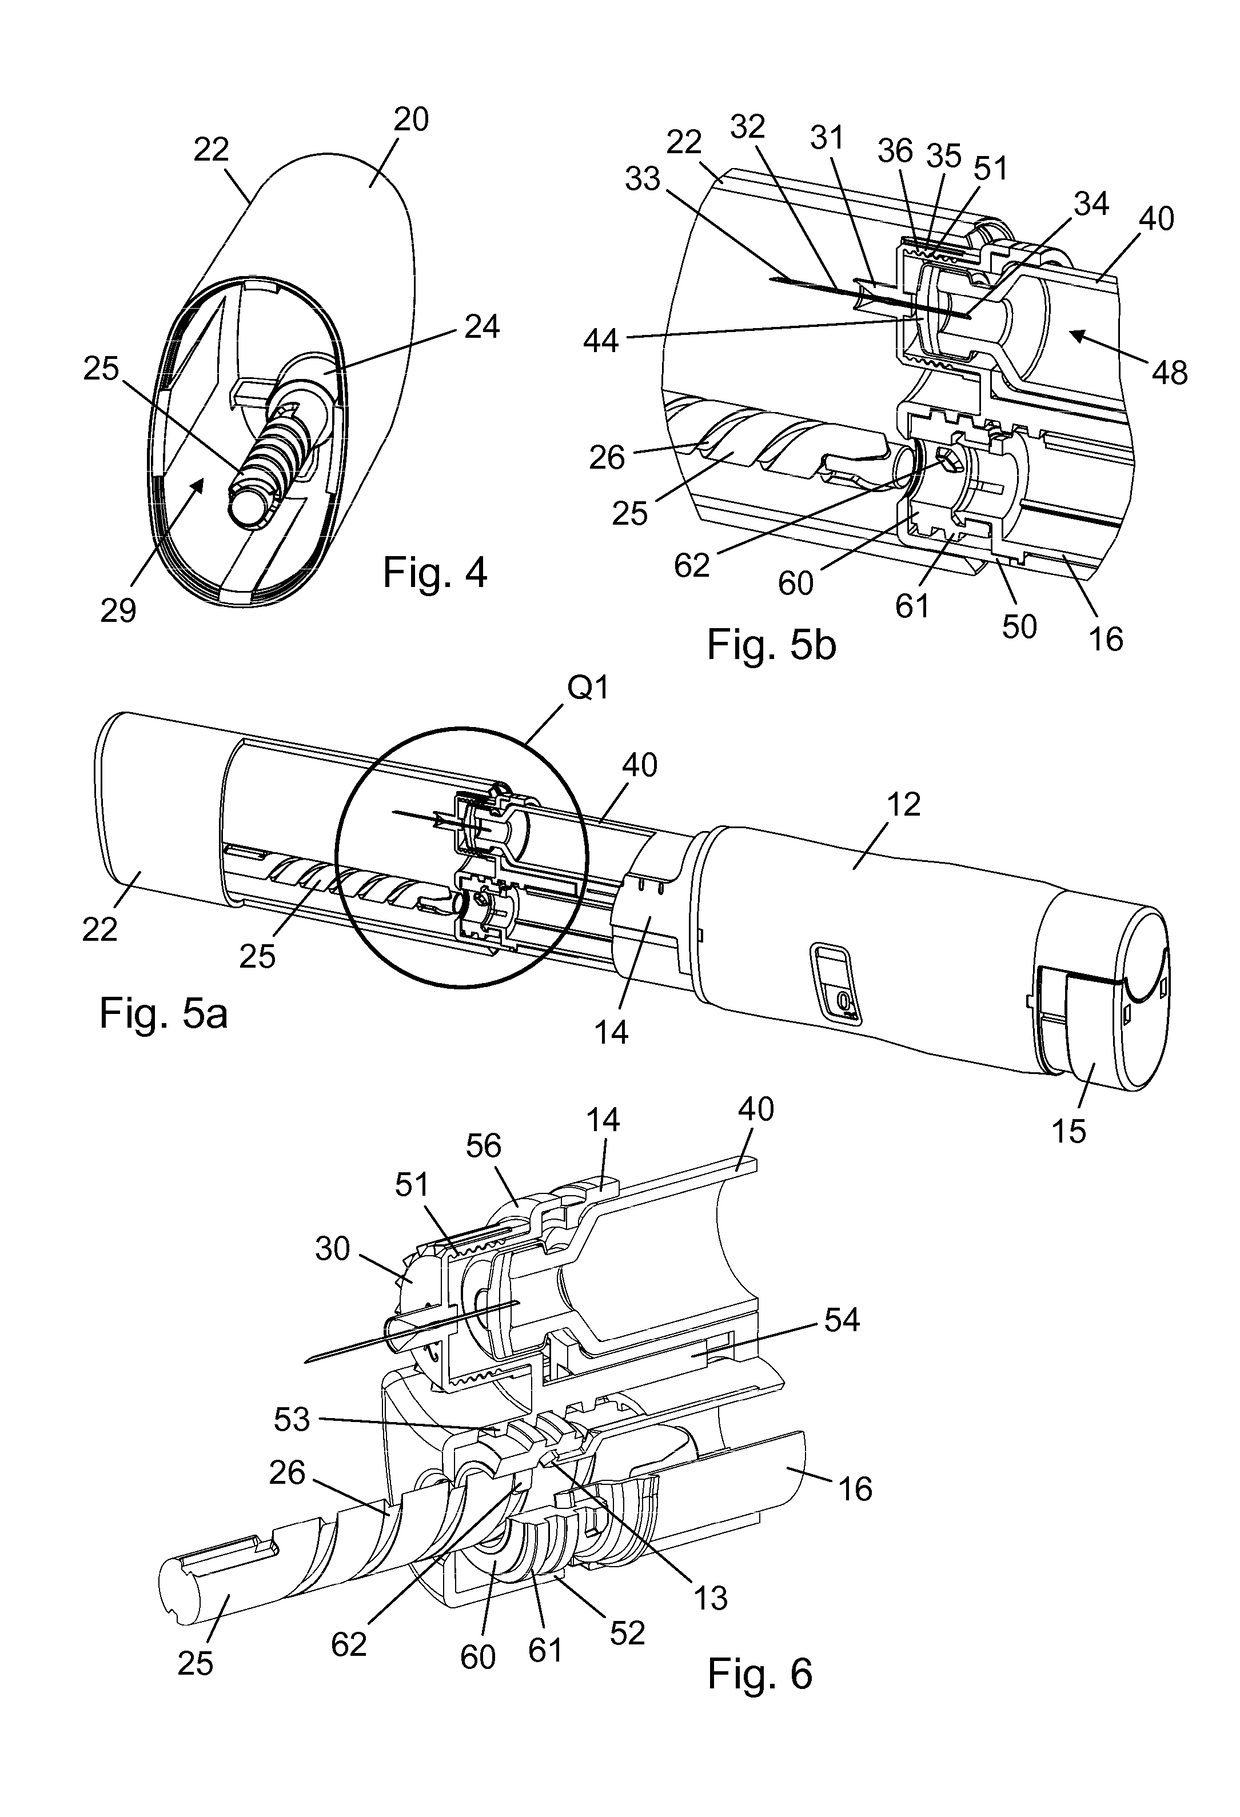 Drug Delivery Device with Cap Induced Needle Movement